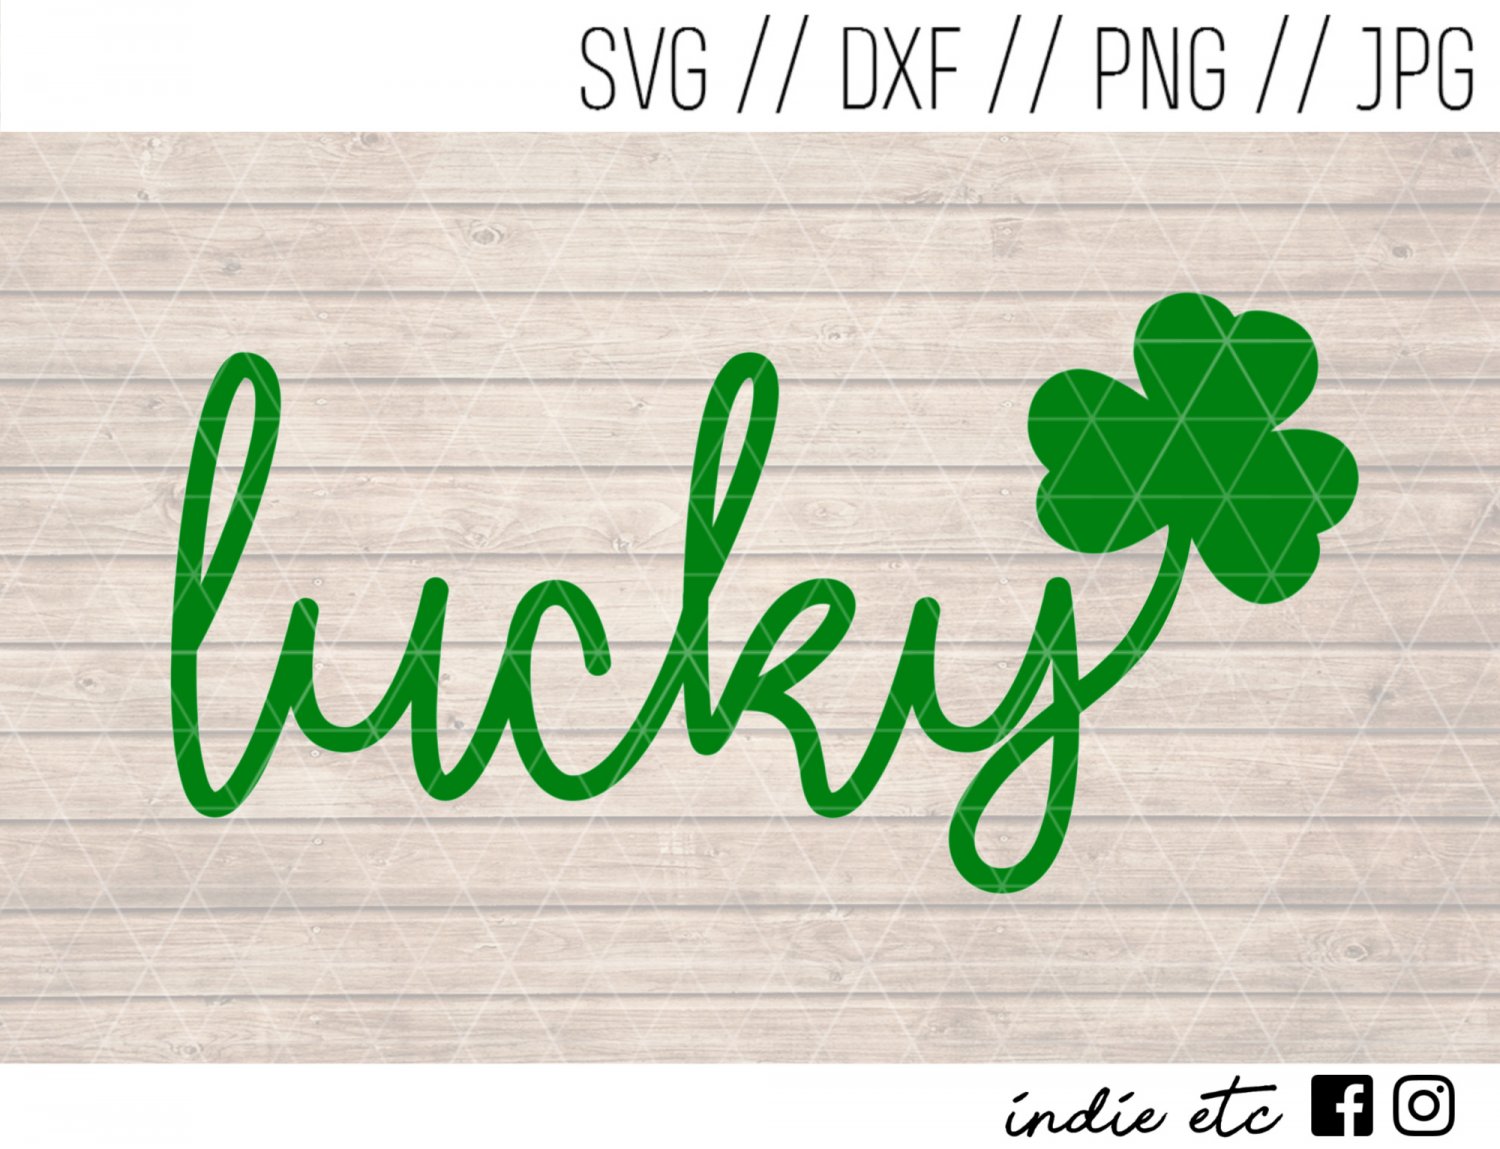 Lucky with Clover Digital Art File Hand Drawn (svg, dxf, png, jpg, cut file, sublimation)